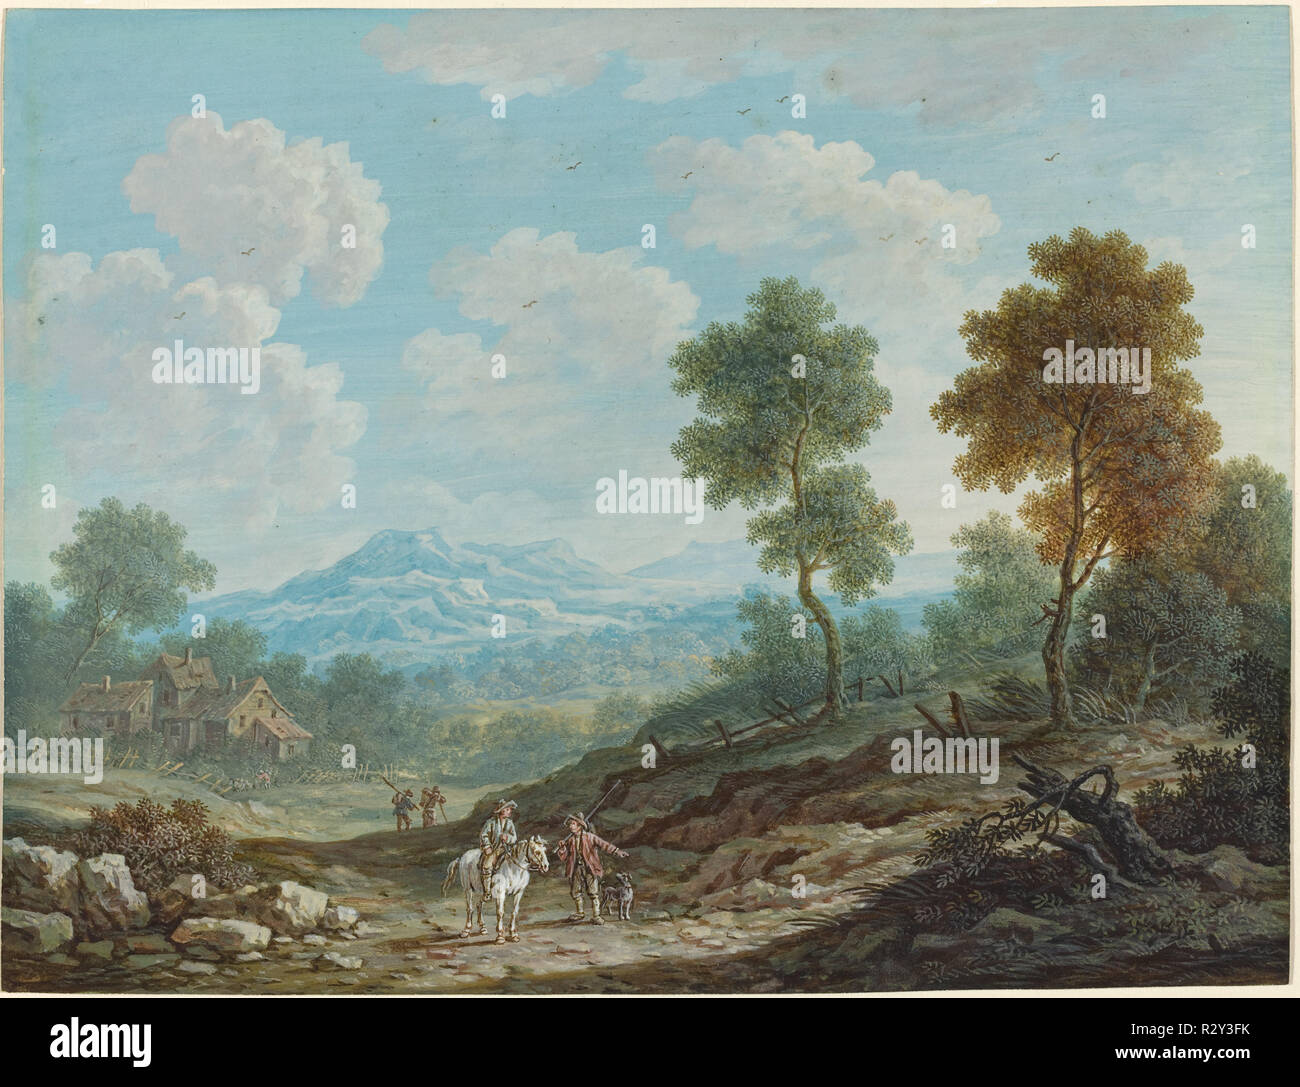 Travelers in a Broad Valley. Dated: c. 1750. Dimensions: overall: 17.3 x 22.6 cm (6 13/16 x 8 7/8 in.). Medium: gouache on prepared parchment. Museum: National Gallery of Art, Washington DC. Author: Johann Christoph Dietzsch. Stock Photo